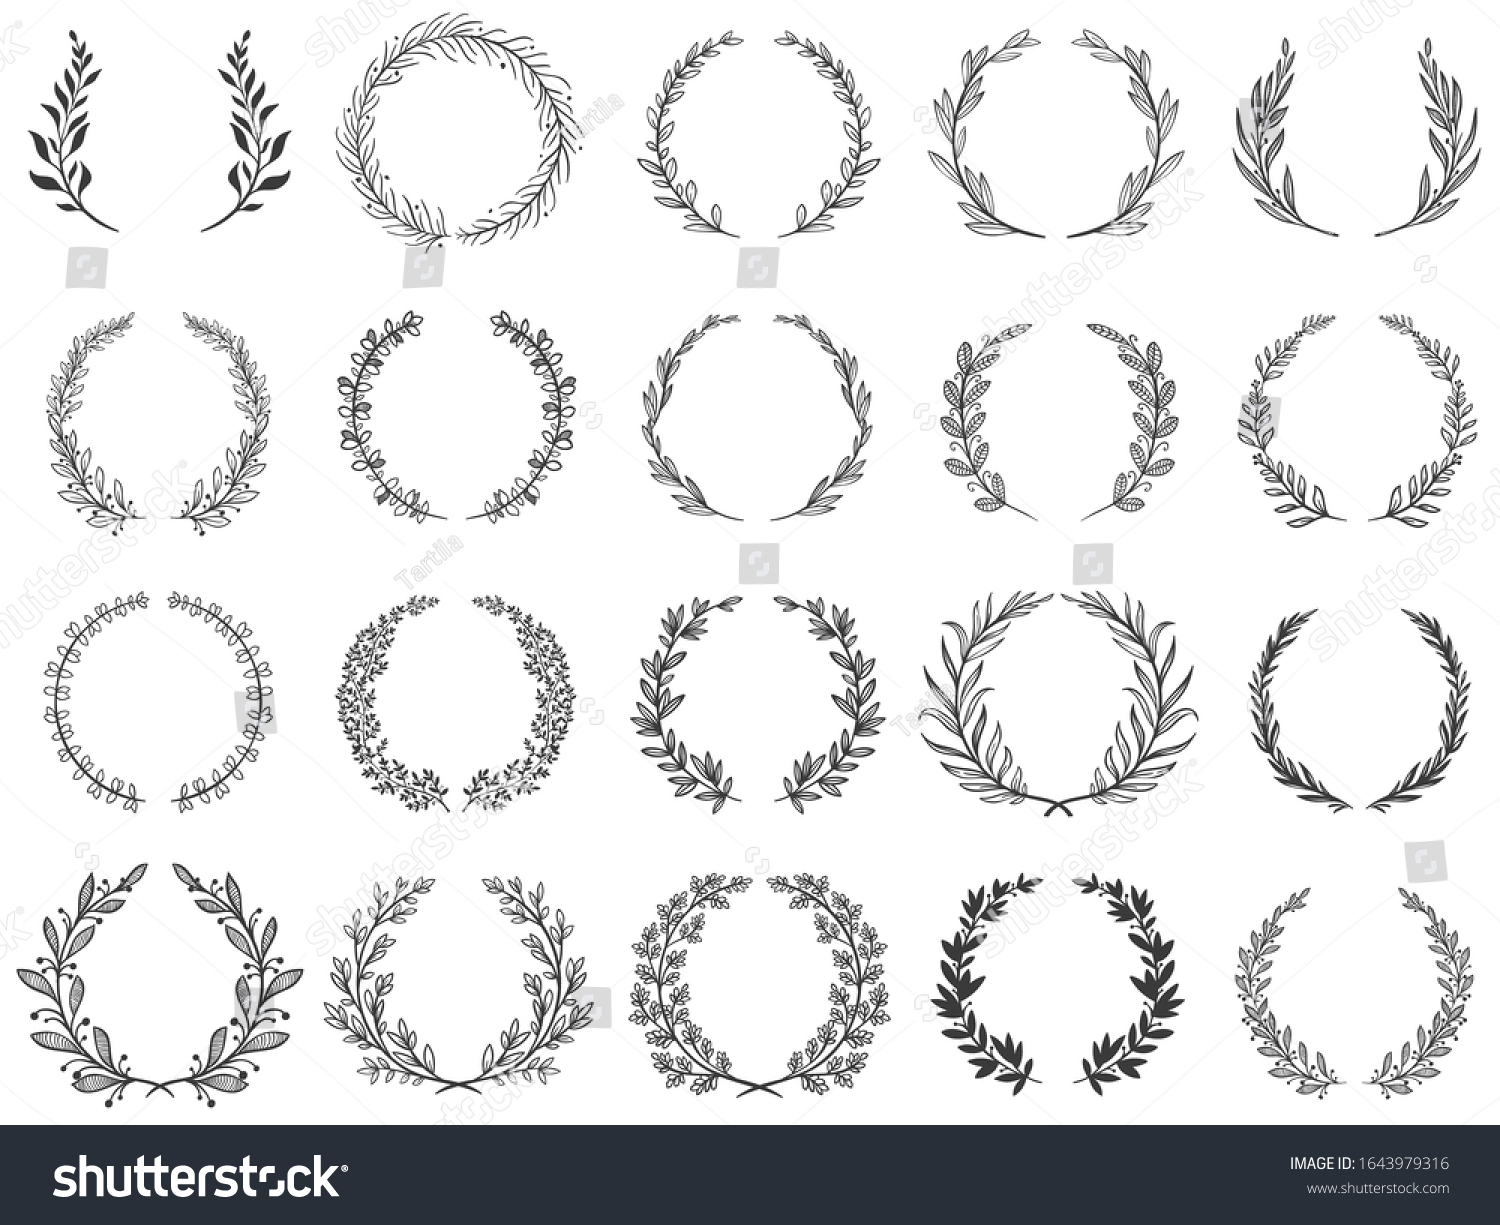 SVG of Ornamental branch wreathes. Laurel leafs wreath, olive branches and round floral ornament frames vector set. Bundle of victory or triumph symbols, natural decorative design elements with bay foliage. svg